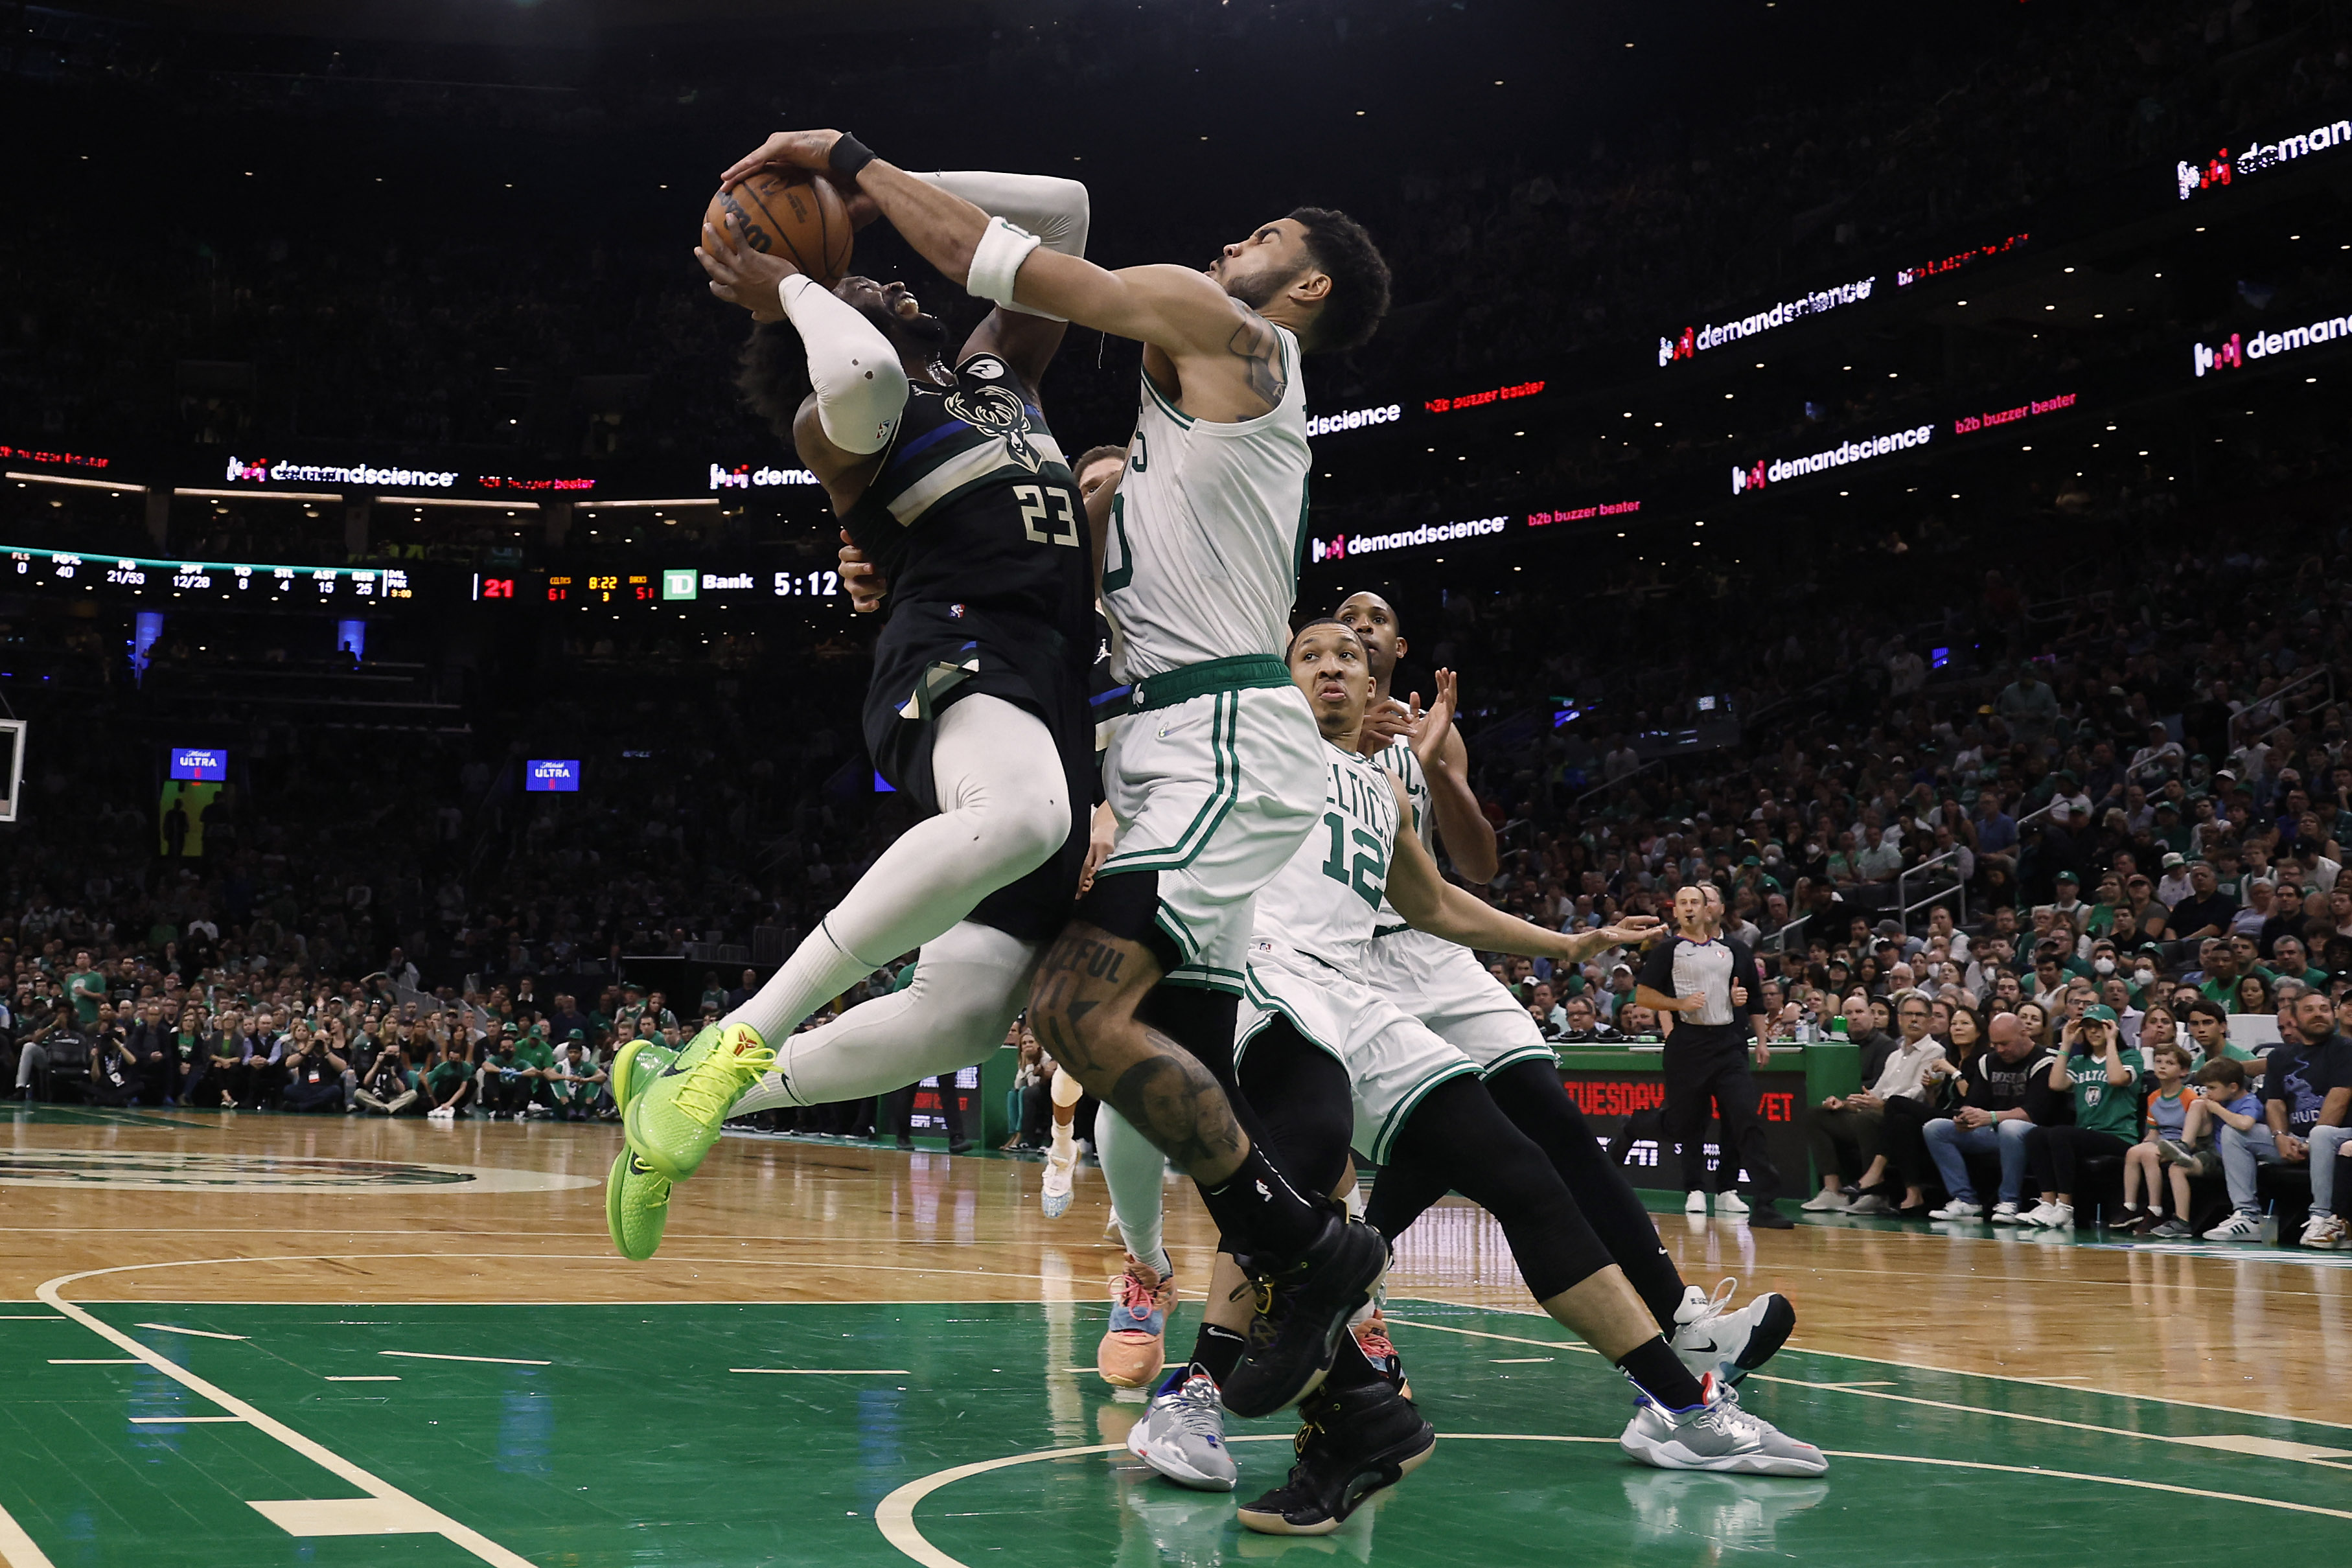 What to know about the Boston Celtics, who face Bucks in NBA playoffs